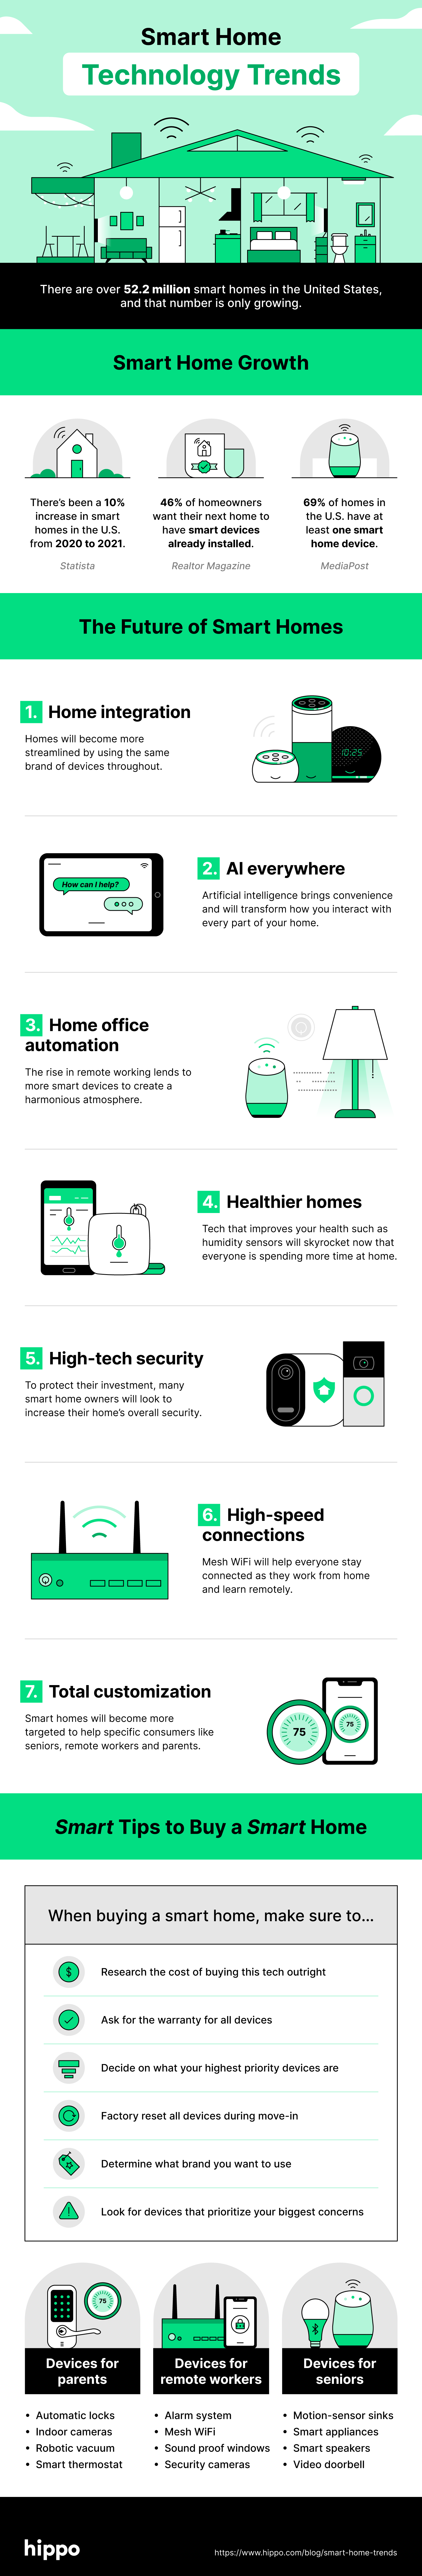 Smart home trends illustrated infographic